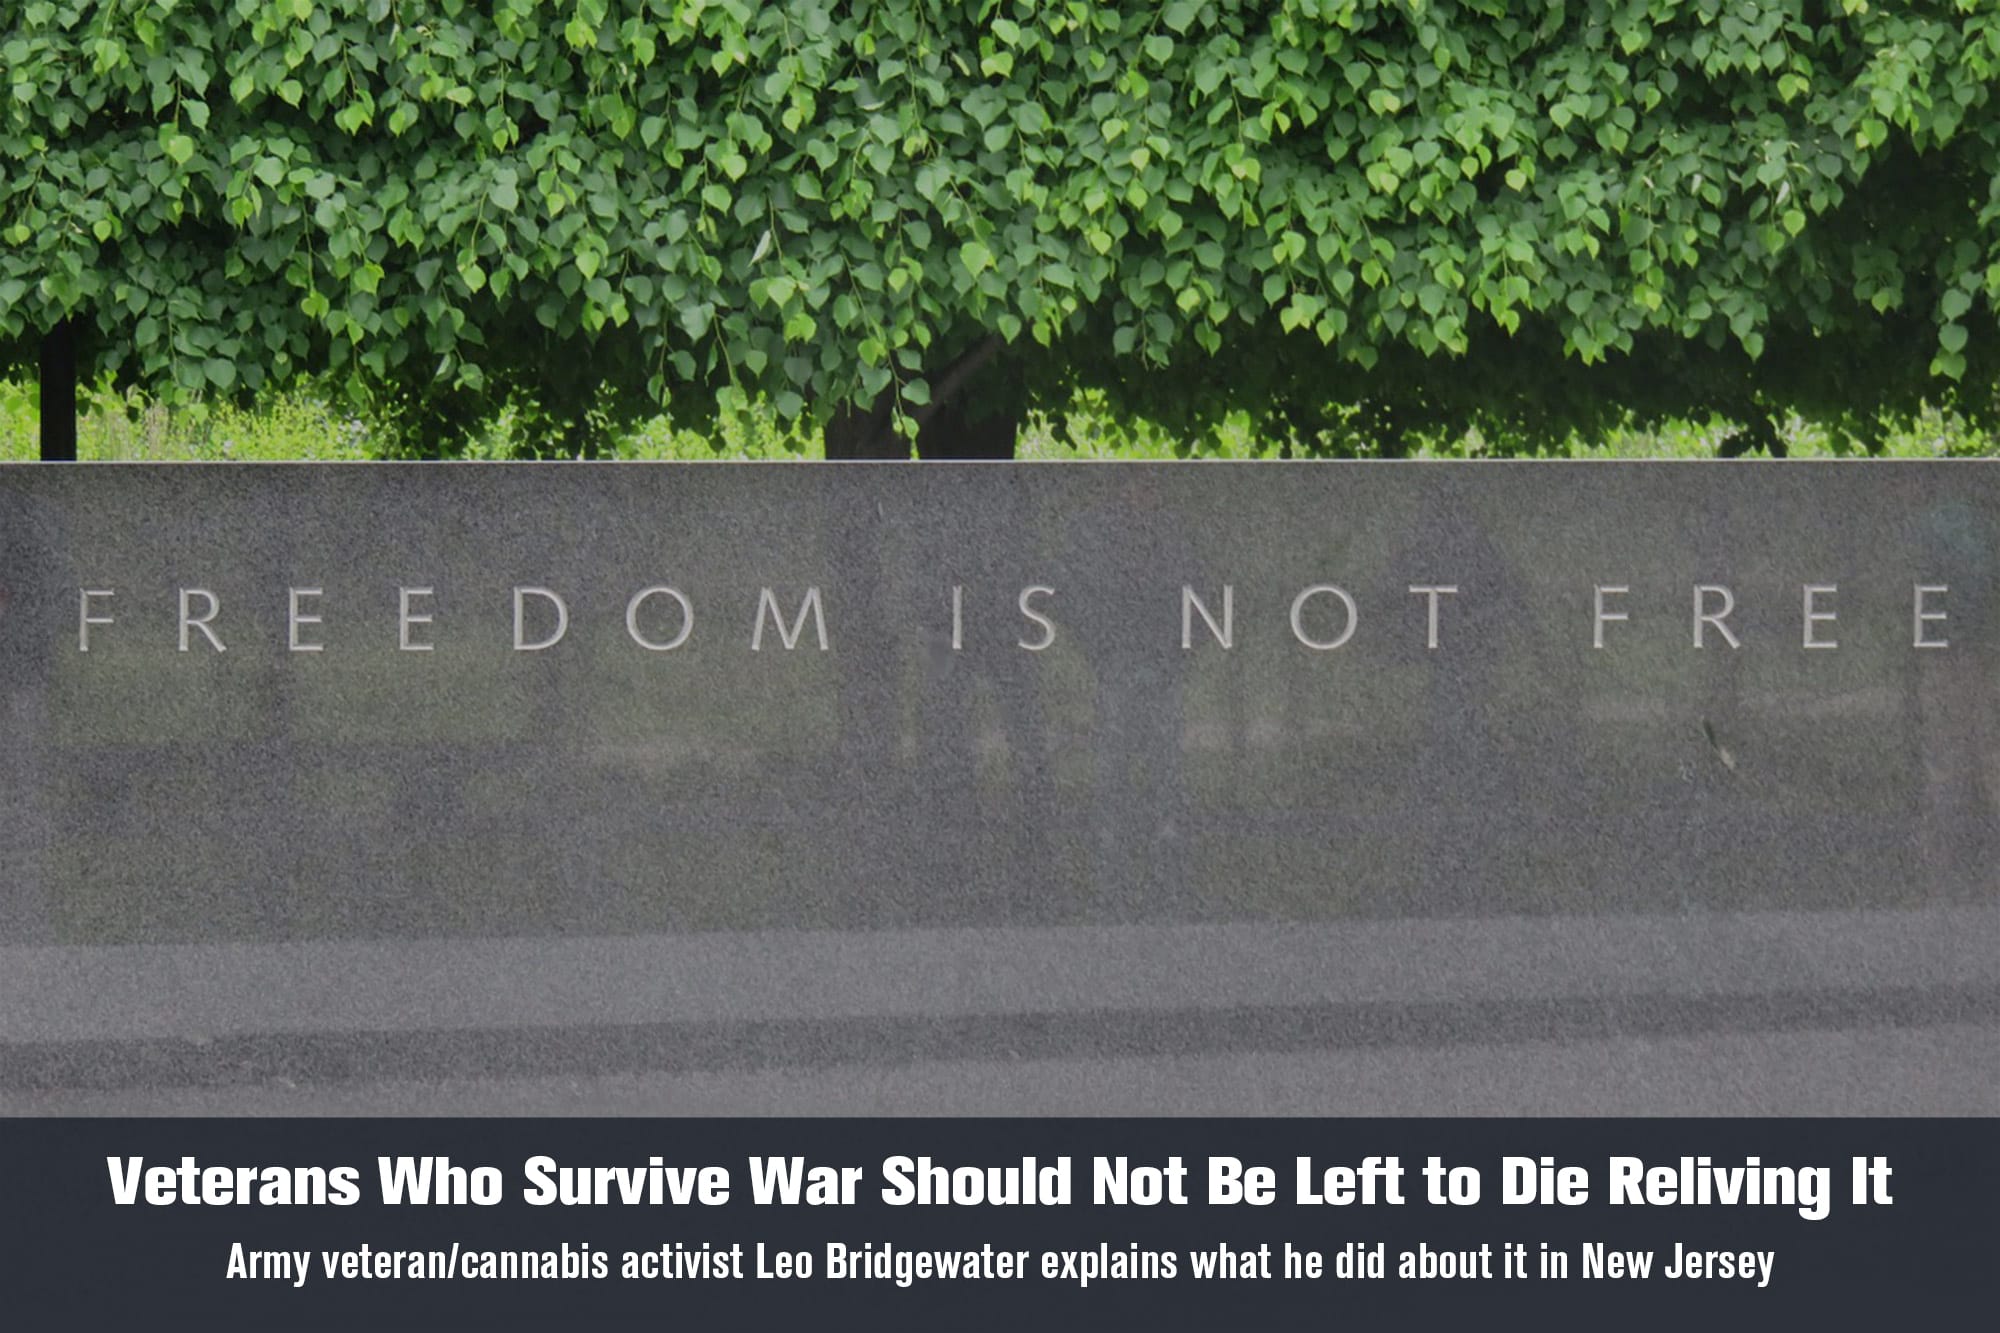 Veterans Who Survive War Should Not Be Left to Die Reliving It